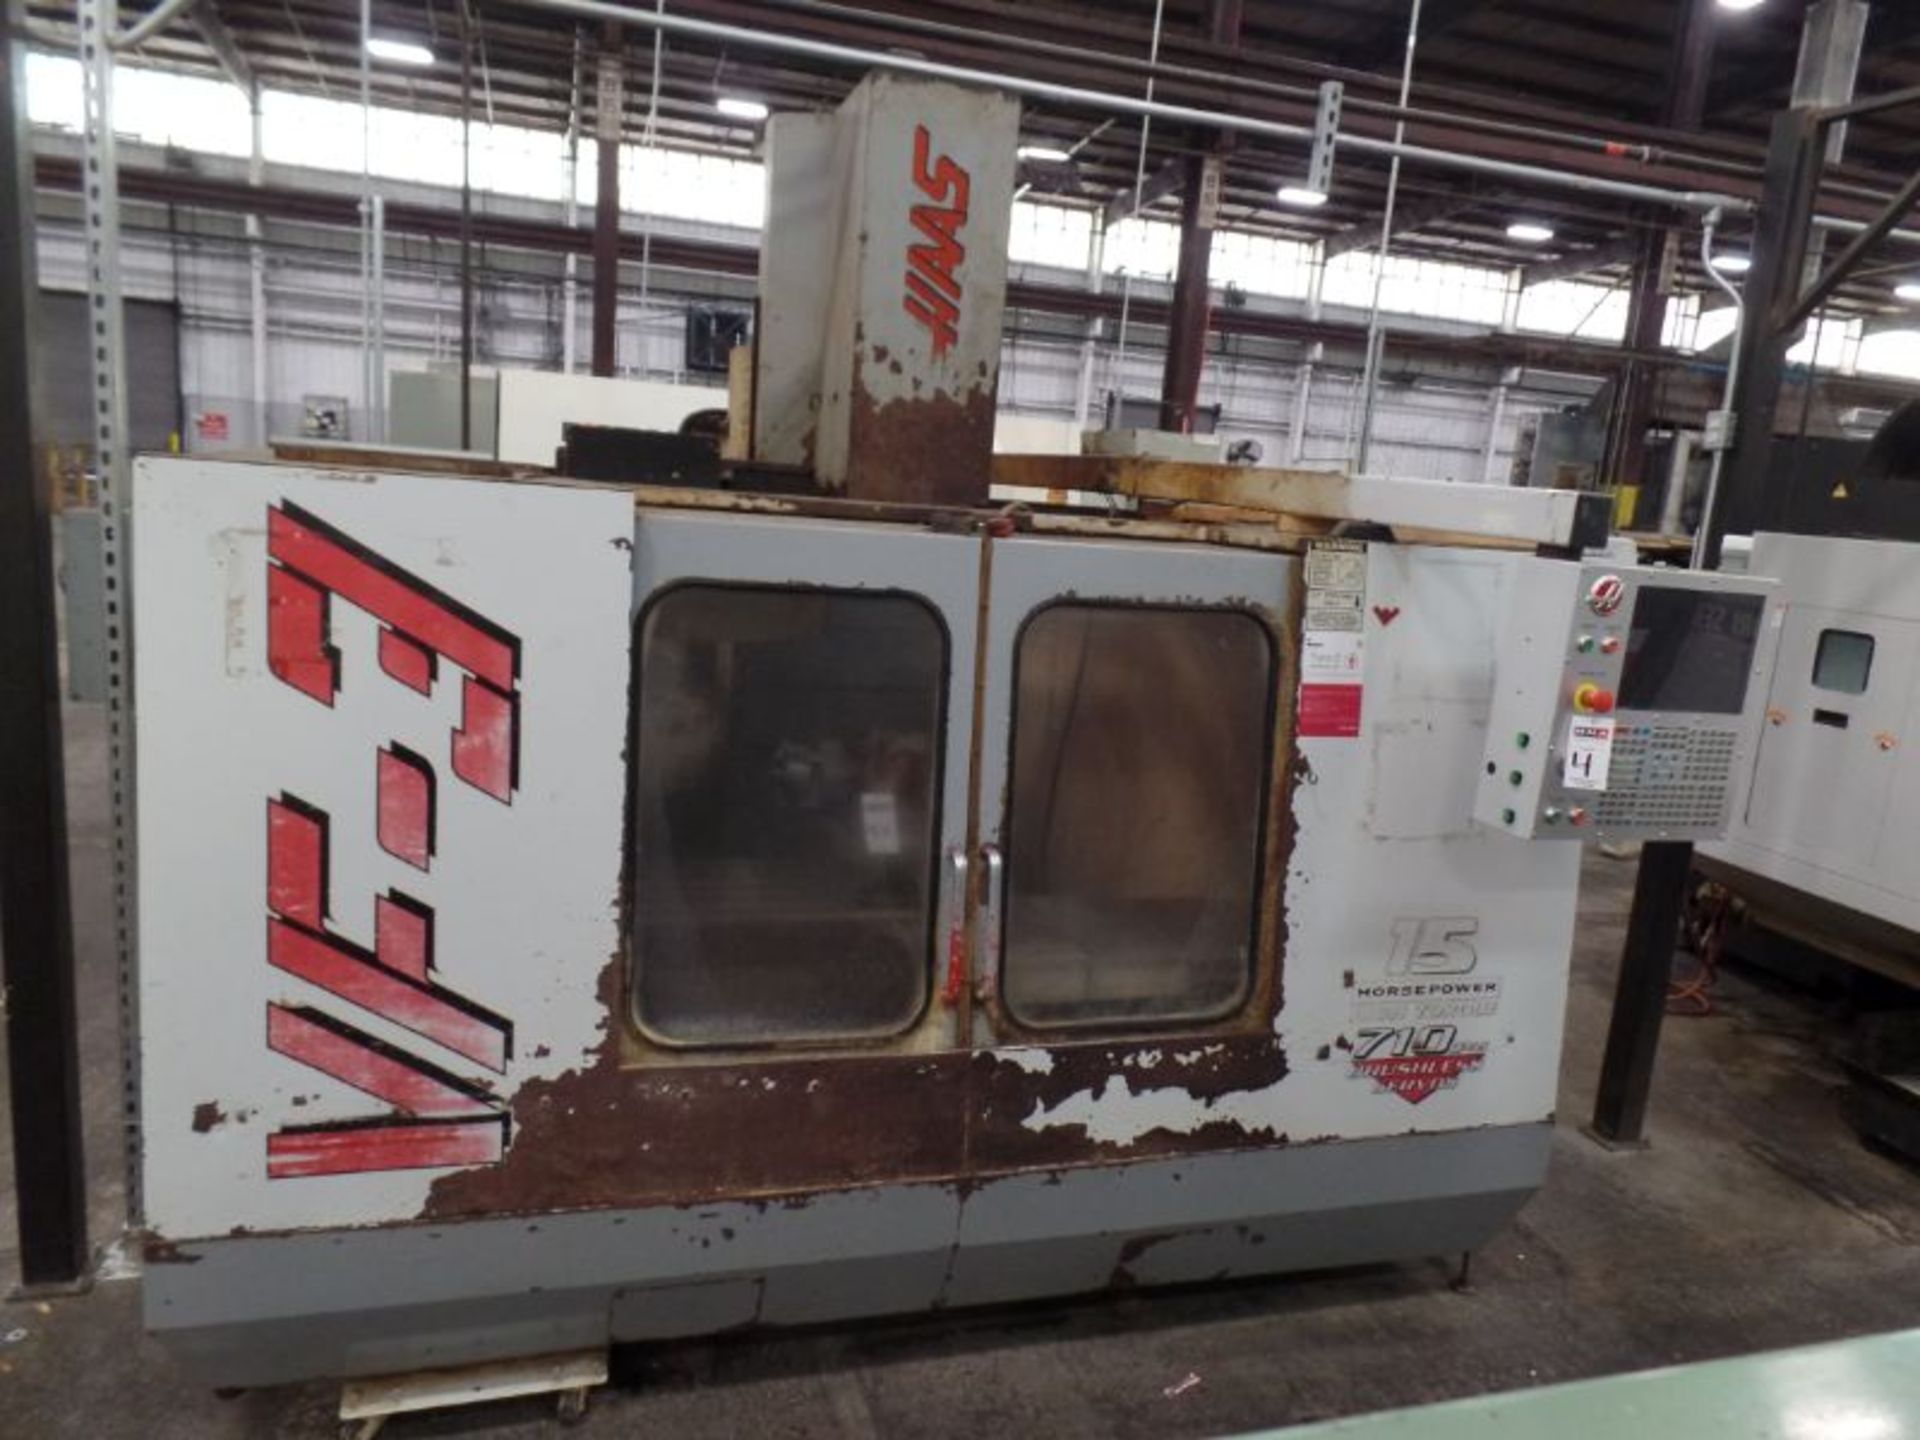 Haas VF-3, Retro’d control, 40”x 20”x 20” Travels, CT40, New 1997 *Indexer Sold Separate* - Image 4 of 9